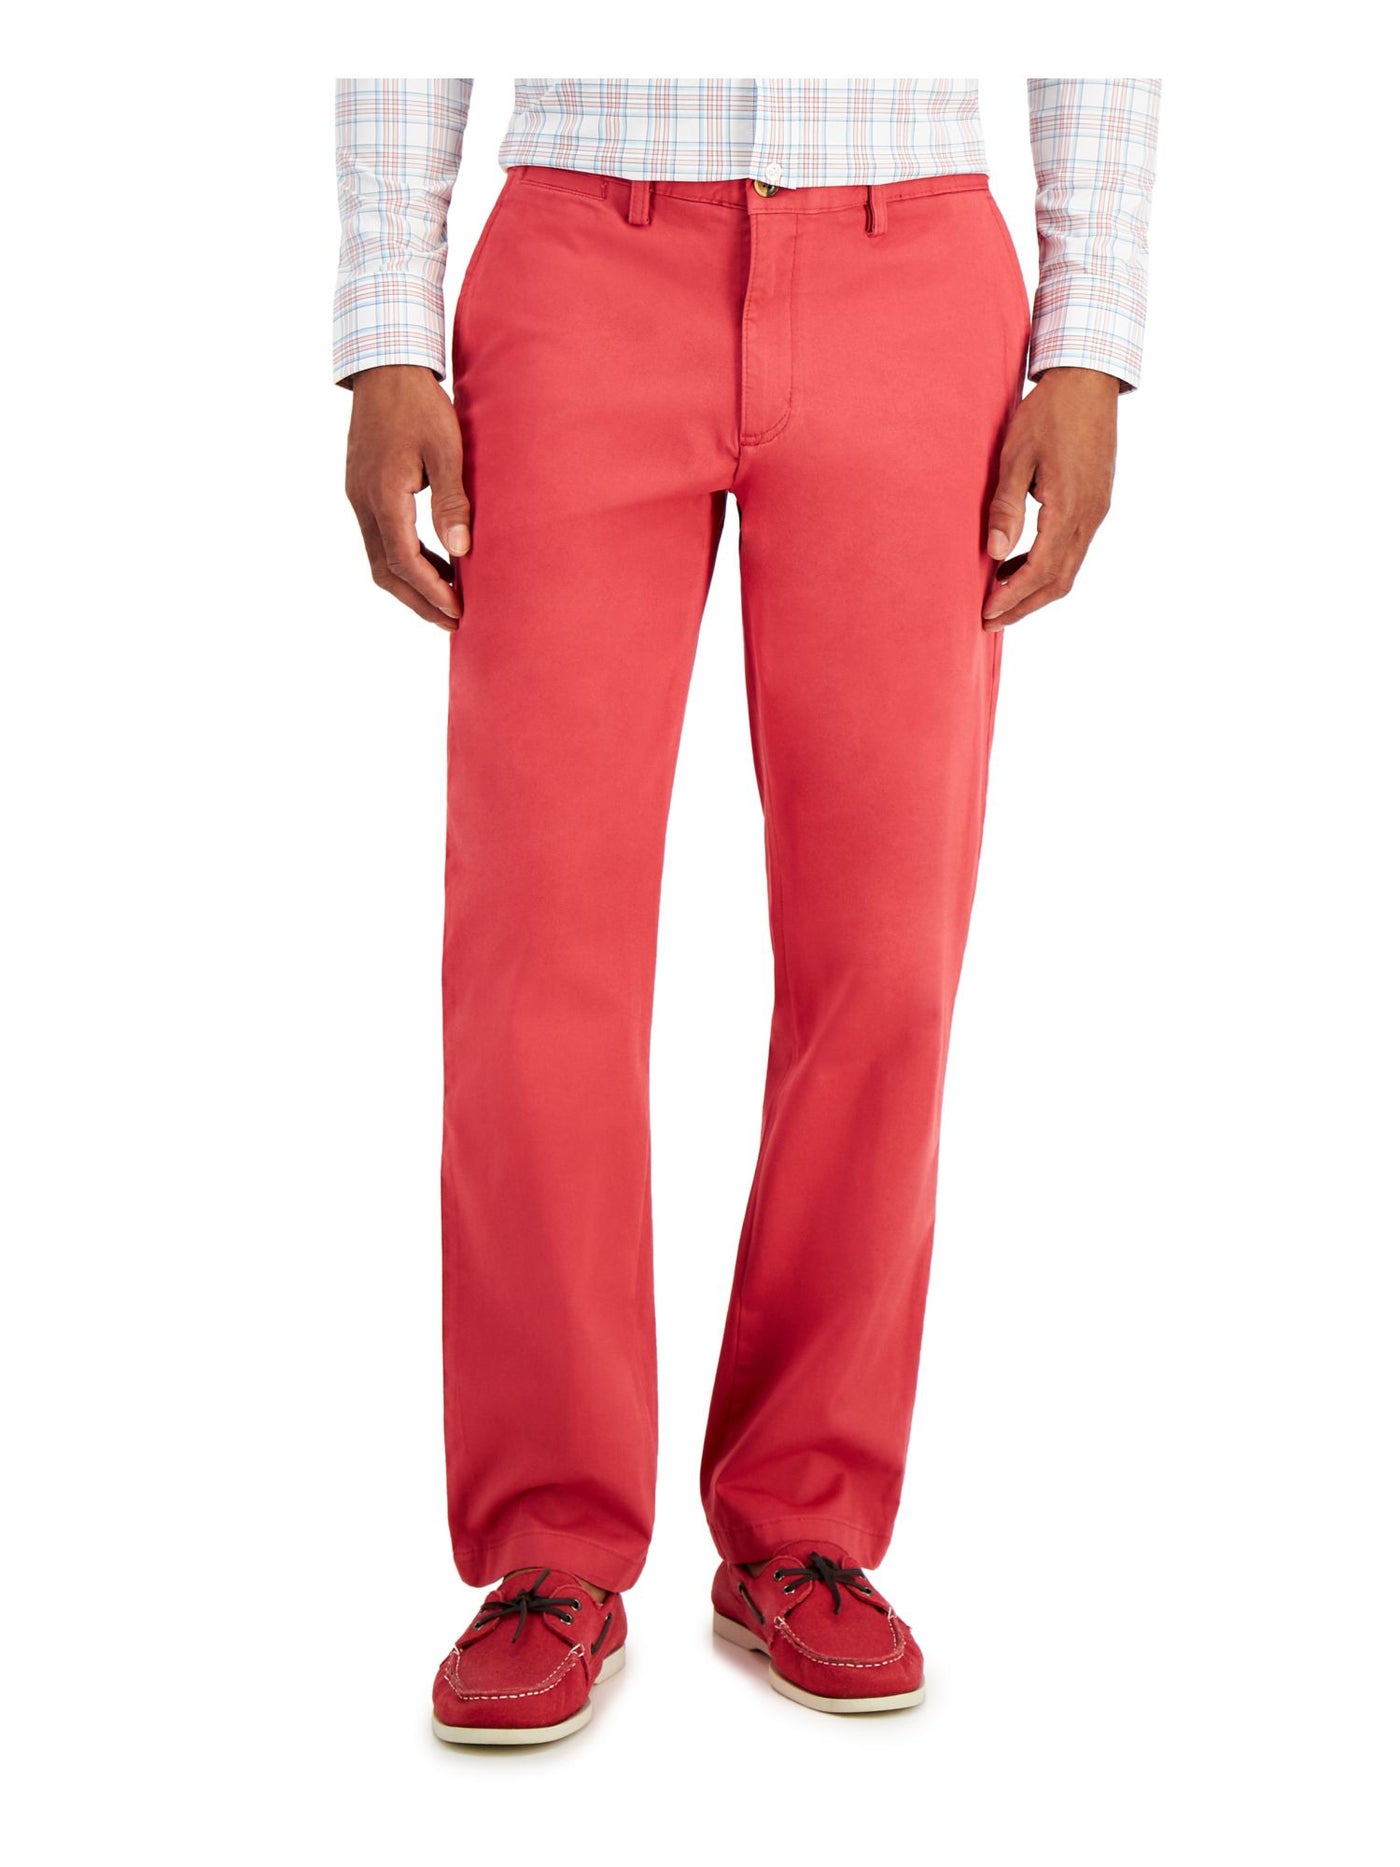 CLUBROOM Mens Coral Classic Fit Stretch Chino Pants 36W\32L